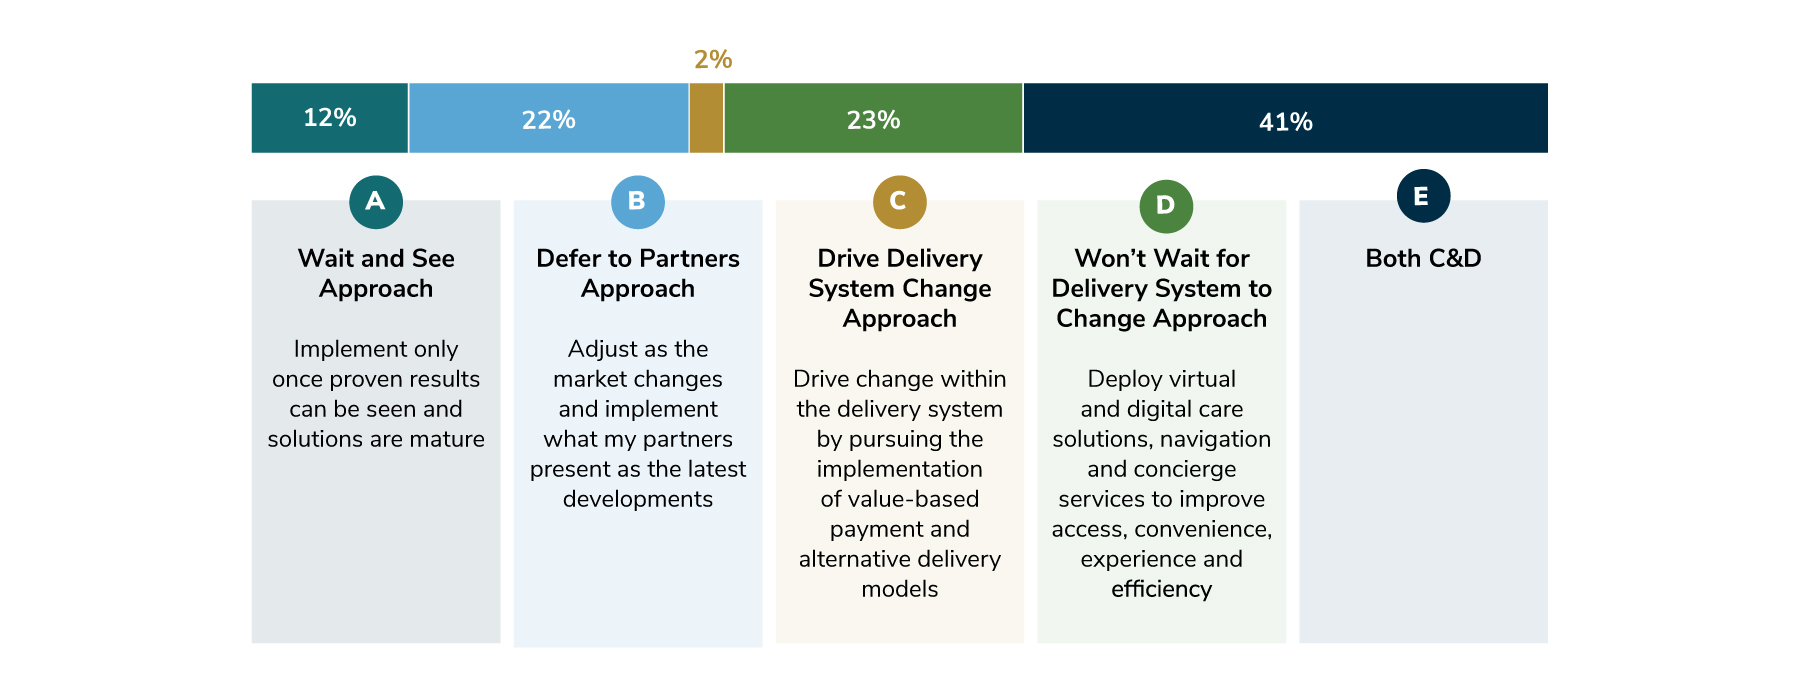 41% of employers are pursuing both delivery system reform and virtual care solutions to drive change. 23% are only pursing virtual solutions. 2% are only pursuing delivery system reform. 22% are deferring to their partners for change. 12% are taking a wait and see approach.